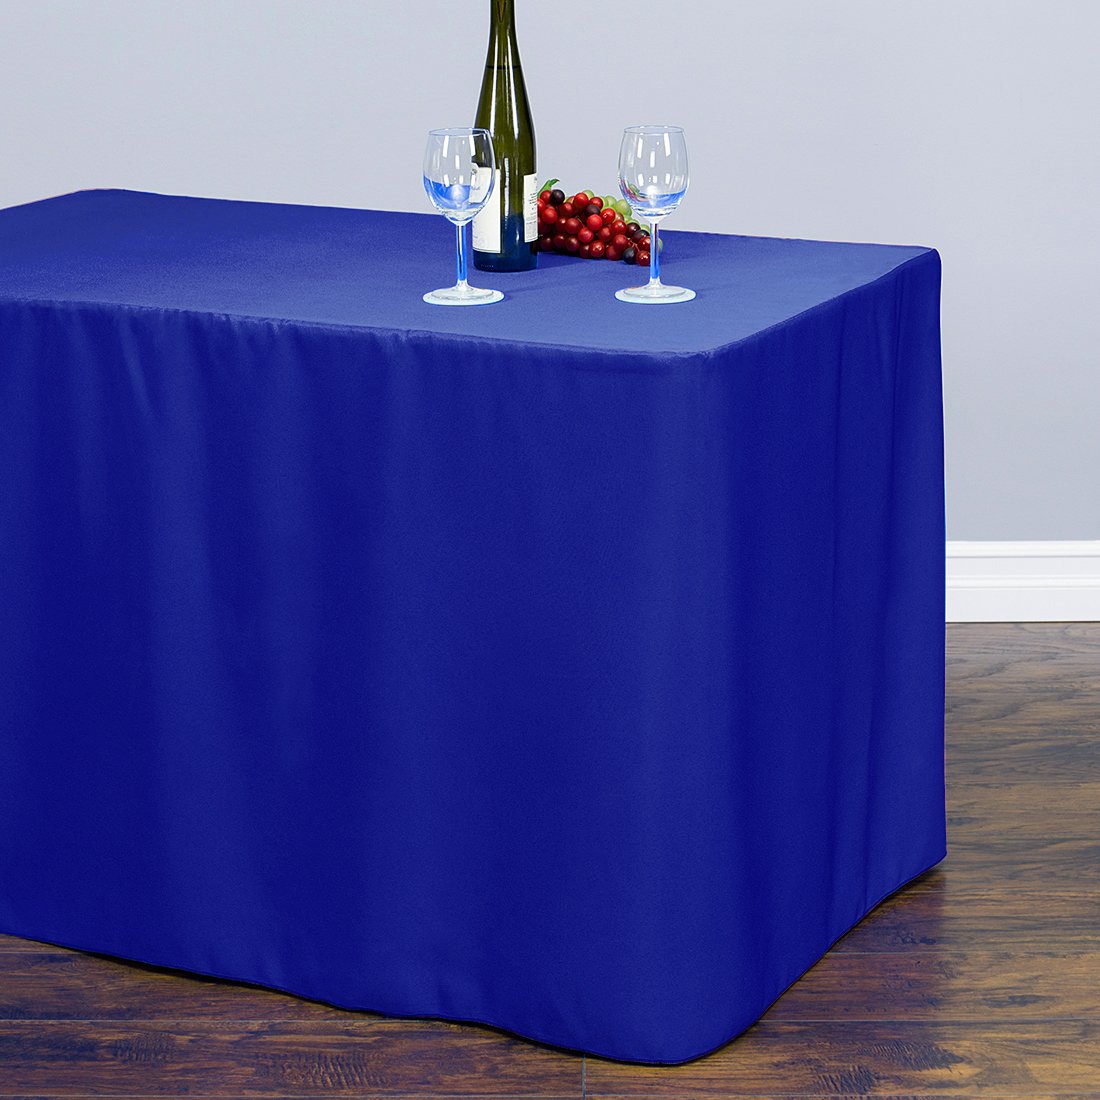 6 ft. Fitted Tablecloths